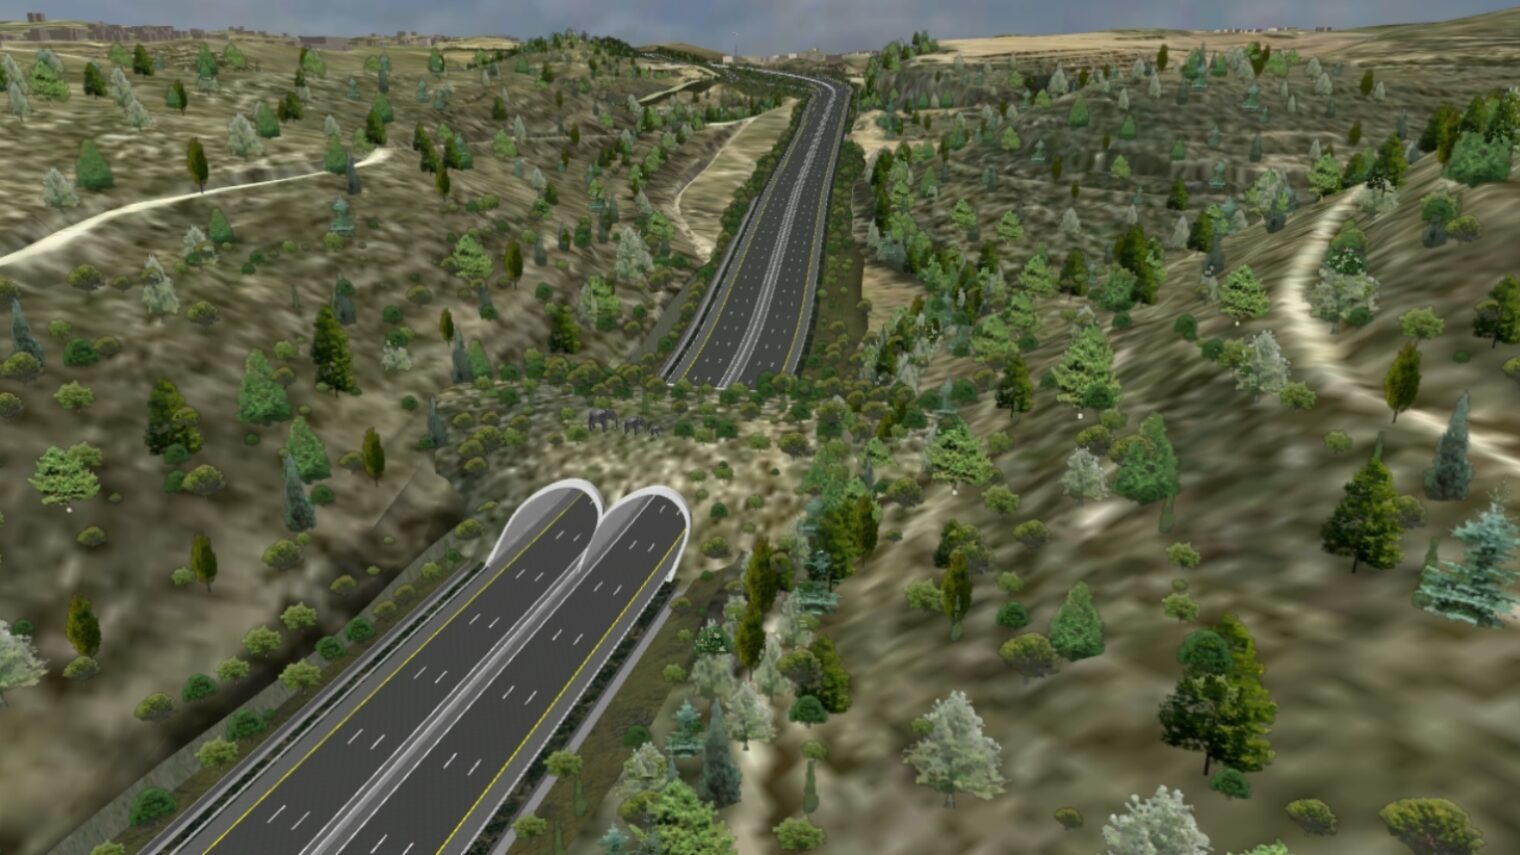 This artist’s rendering of the future Highway 1 with its eco-bridge for animals playfully depicts elephants, though the animals living in the area really include deer, gazelles, wild boars, foxes, jackals, hyenas, porcupines and reptiles. Image courtesy of Netivei Israel